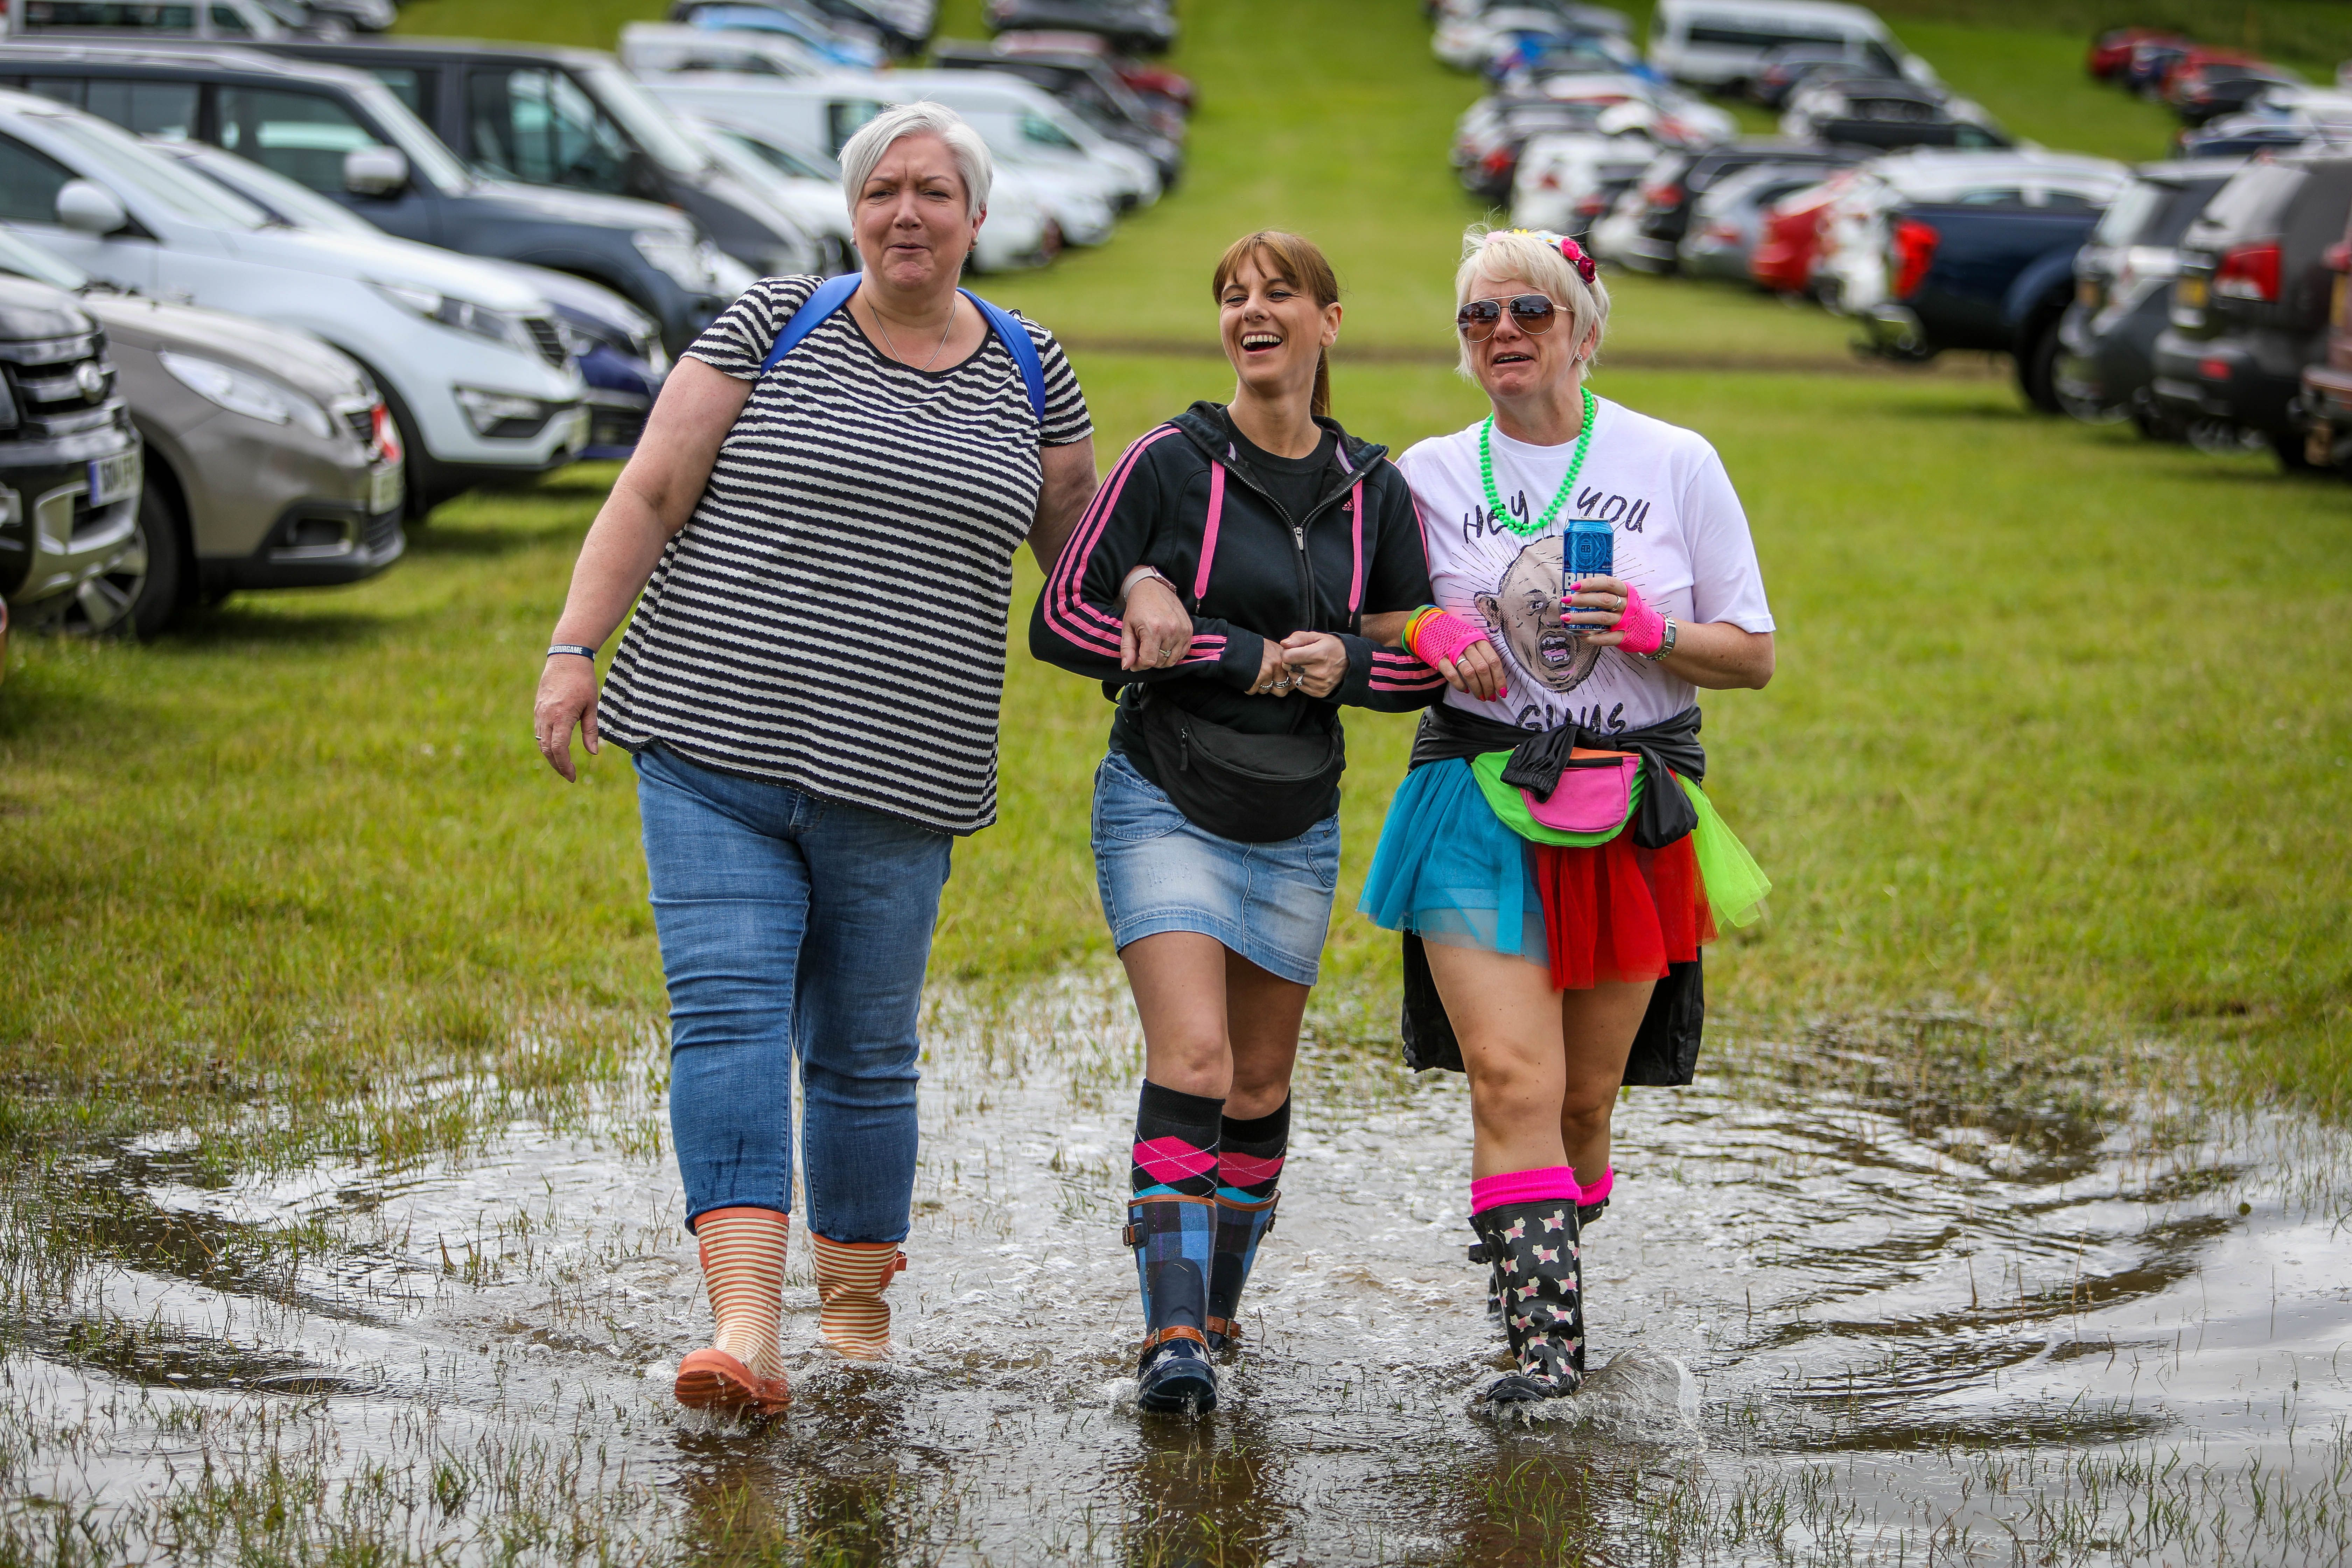 Gail Whyte (49), Leanne Williamson (39) and Elaine Lawrence (48) from Dundee, don't let a puddle stop them heading into Rewind.